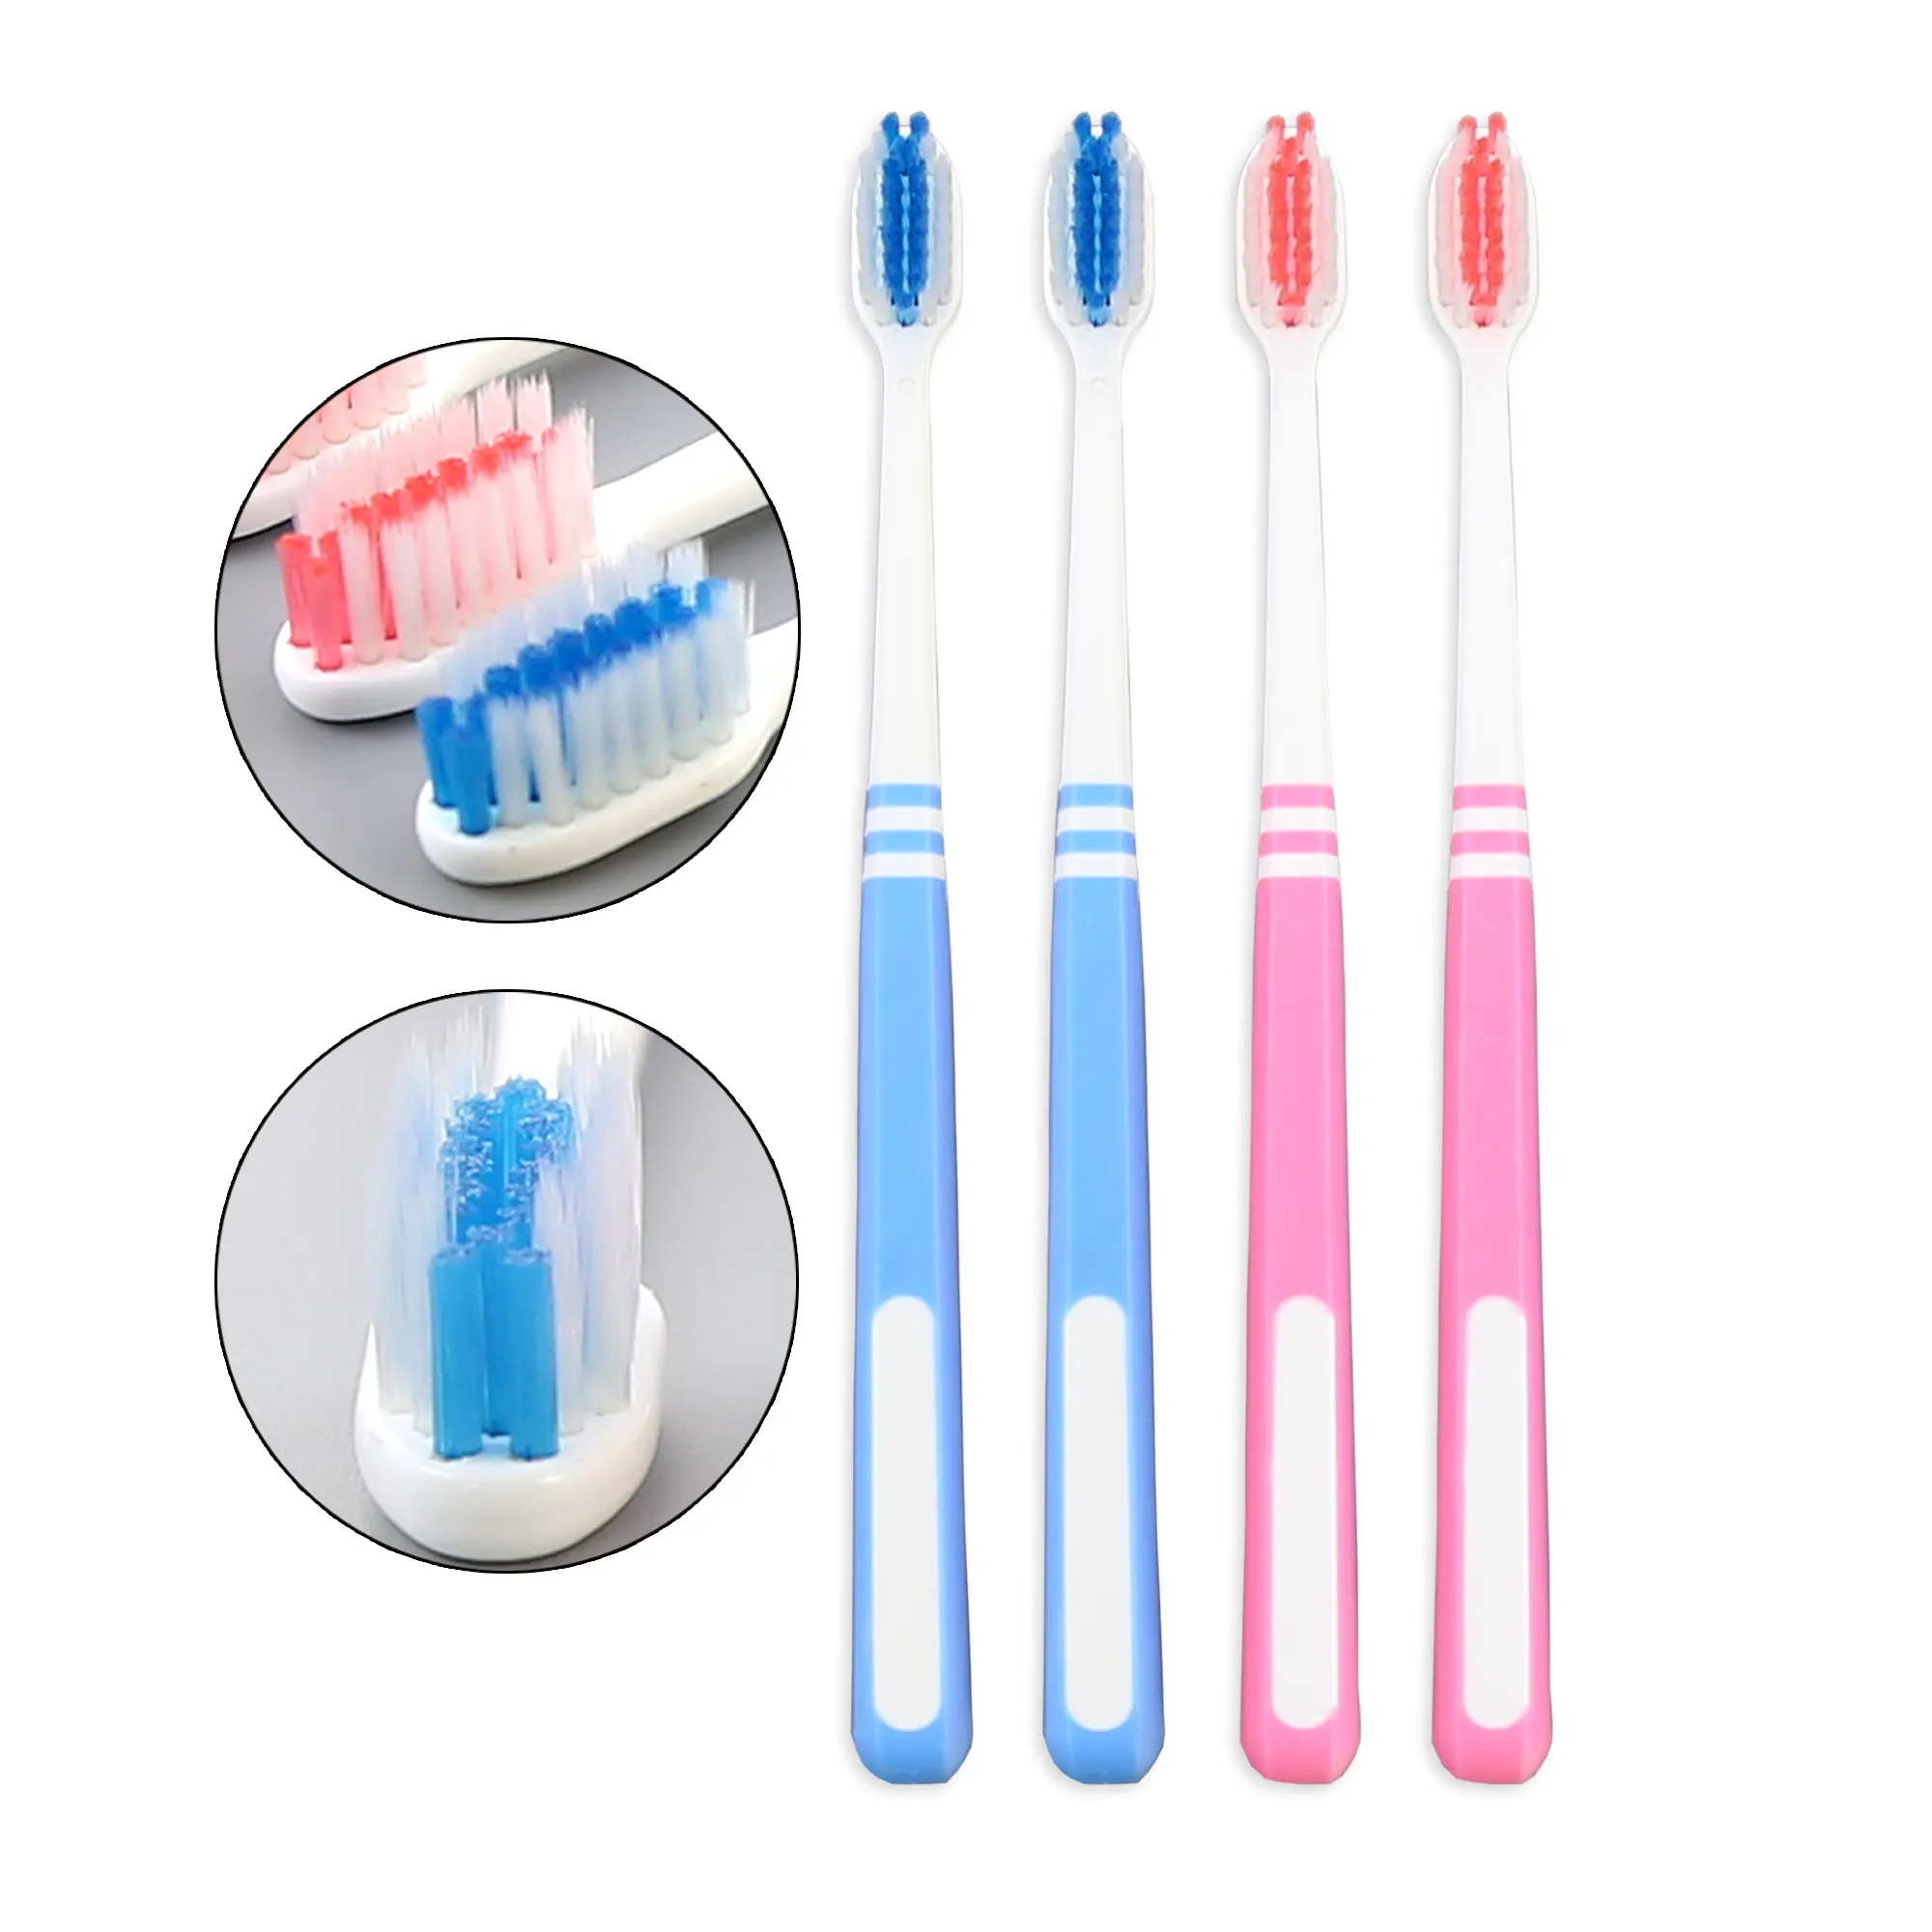 V-Shaped Orthodontic Toothbrush with Nylon medium and soft filaments V-Trim for Cleaning Ortho Braces